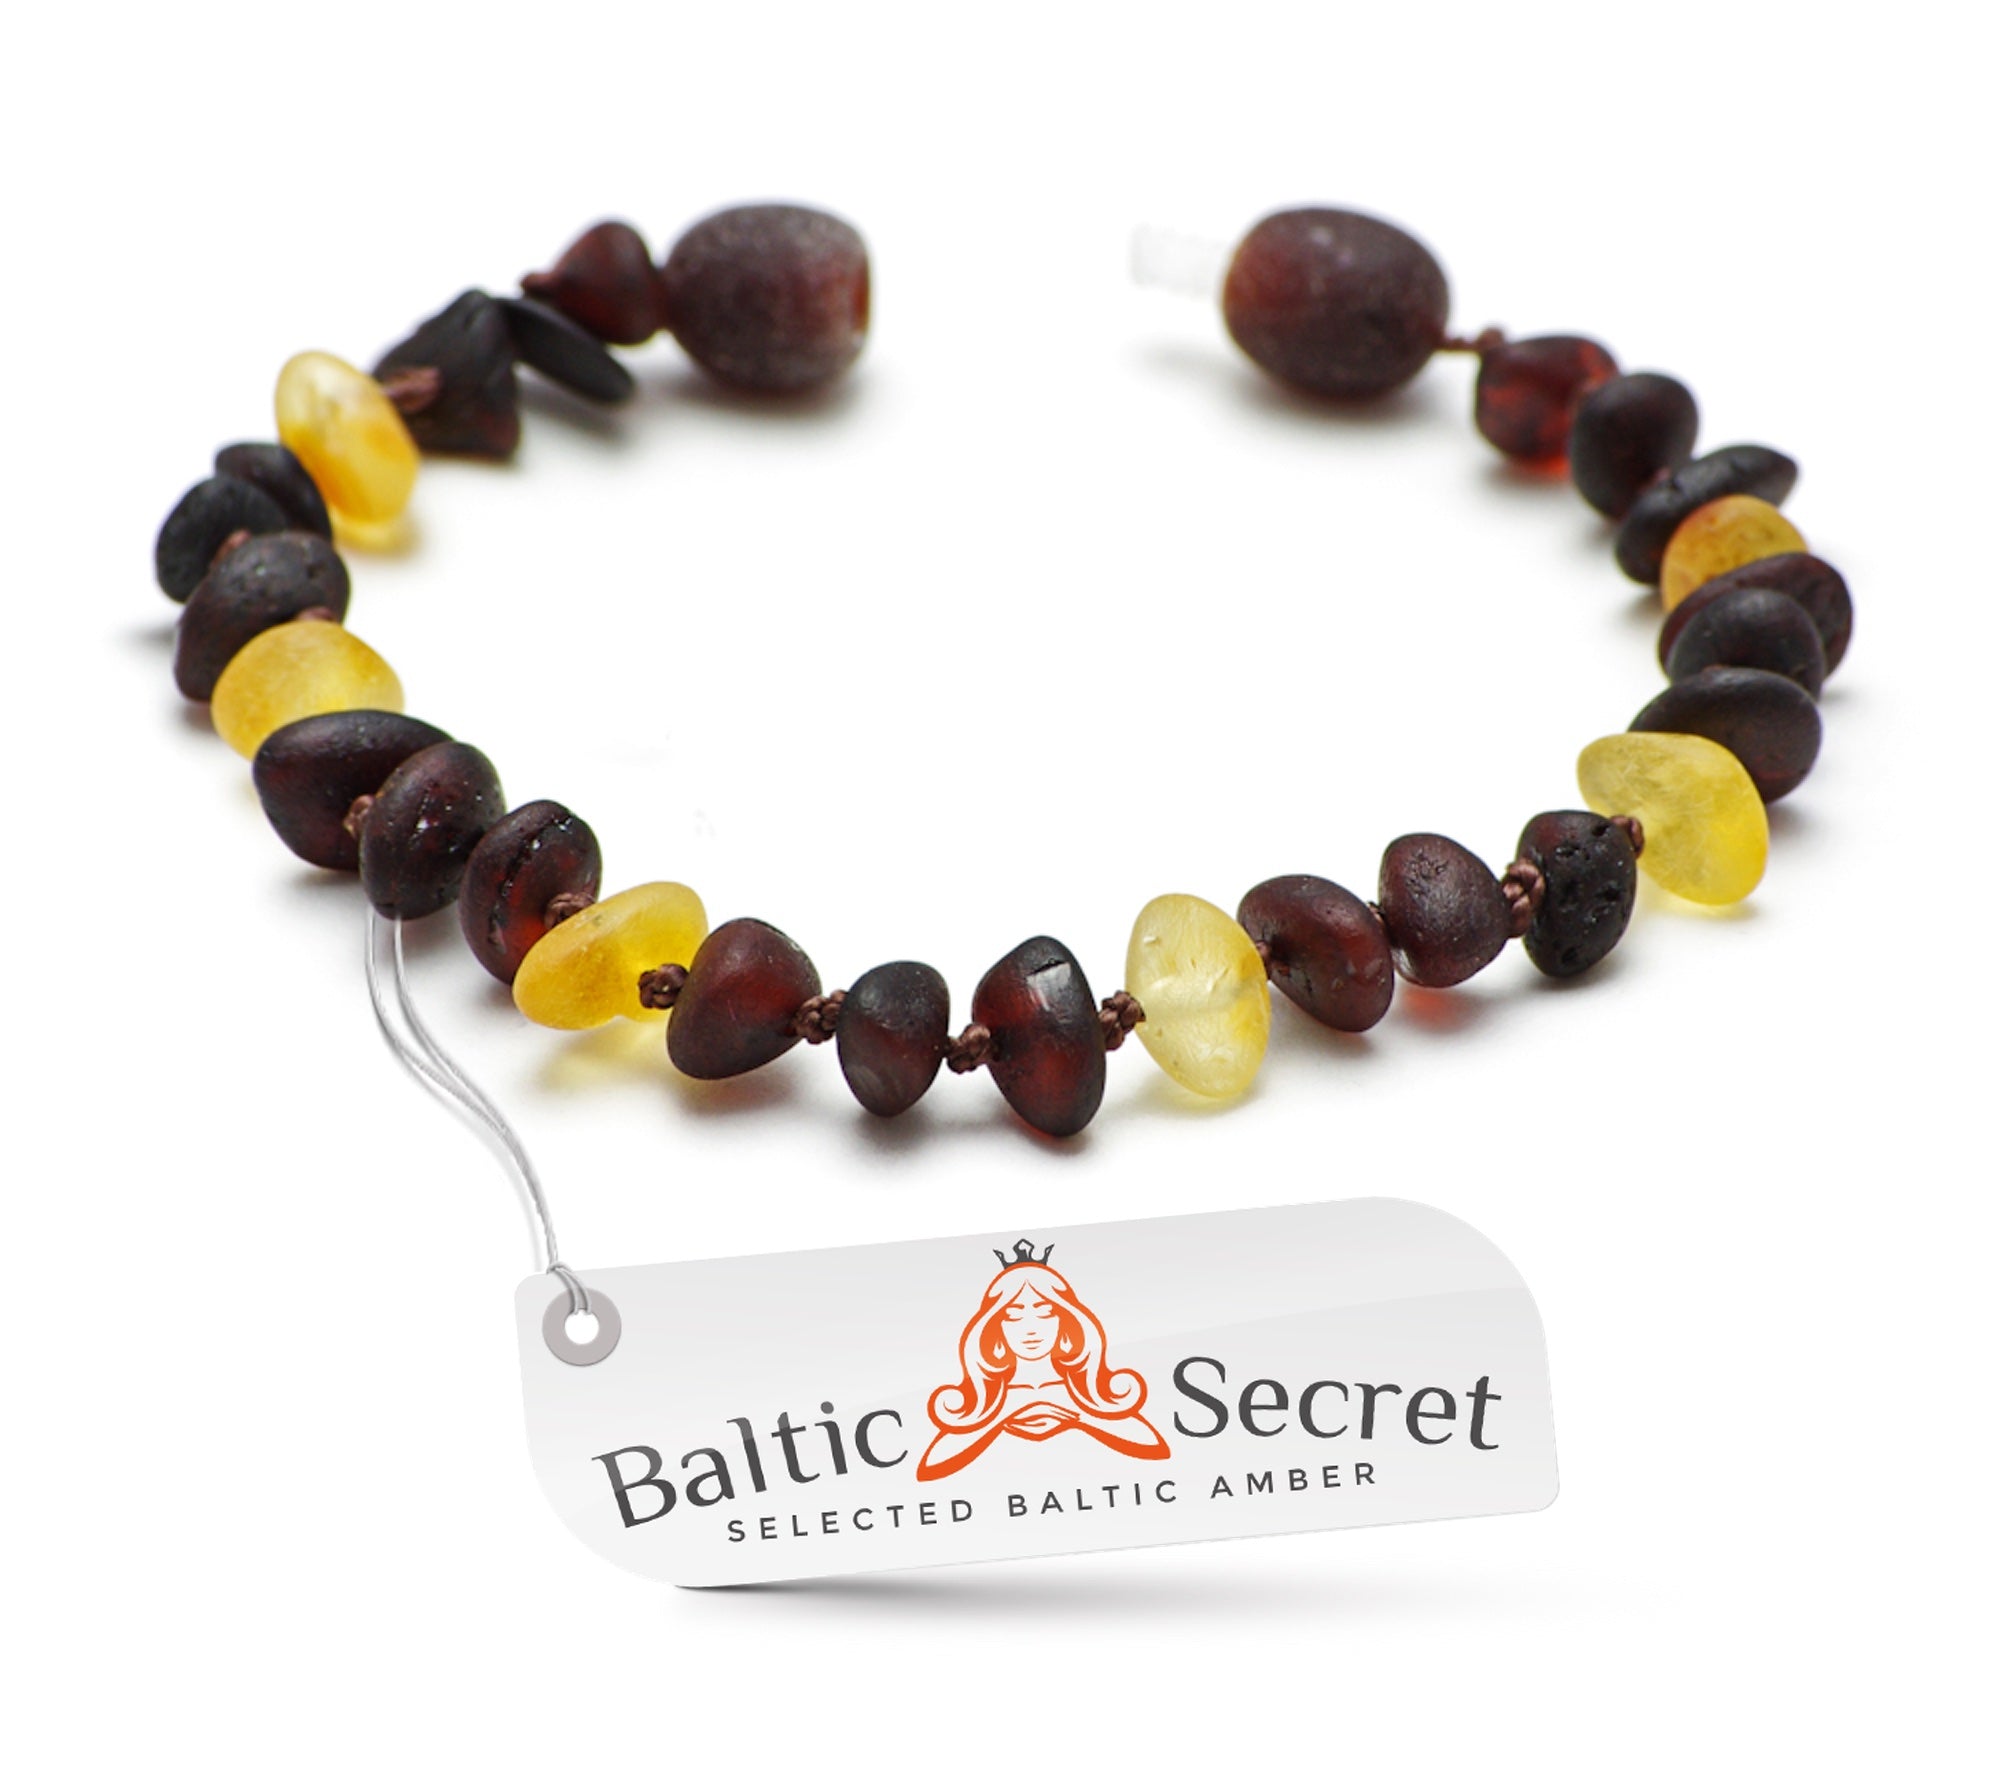 Premium Raw Baltic Amber Necklace and/or Bracelet For Children / Extra Safe